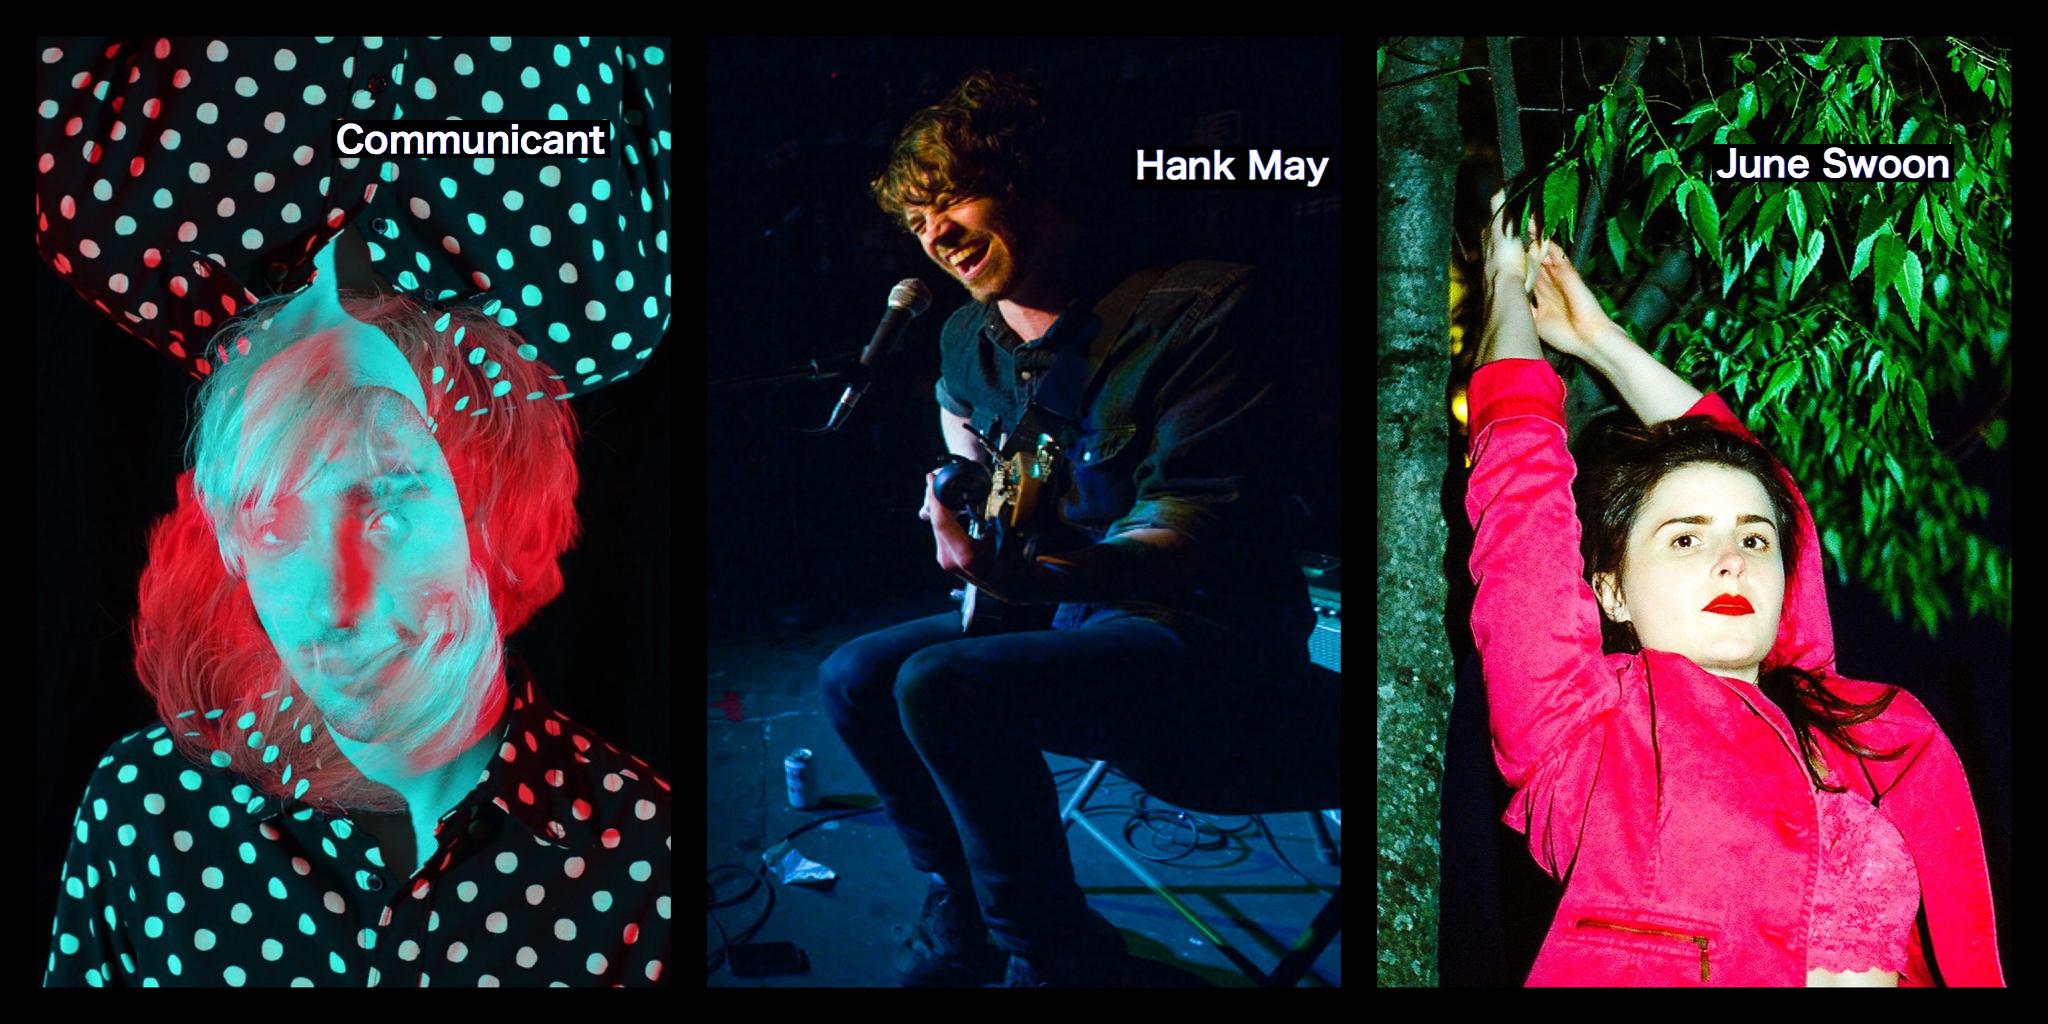 What The Sound Presents: Communicant, Hank May, June Swoon, Jerome